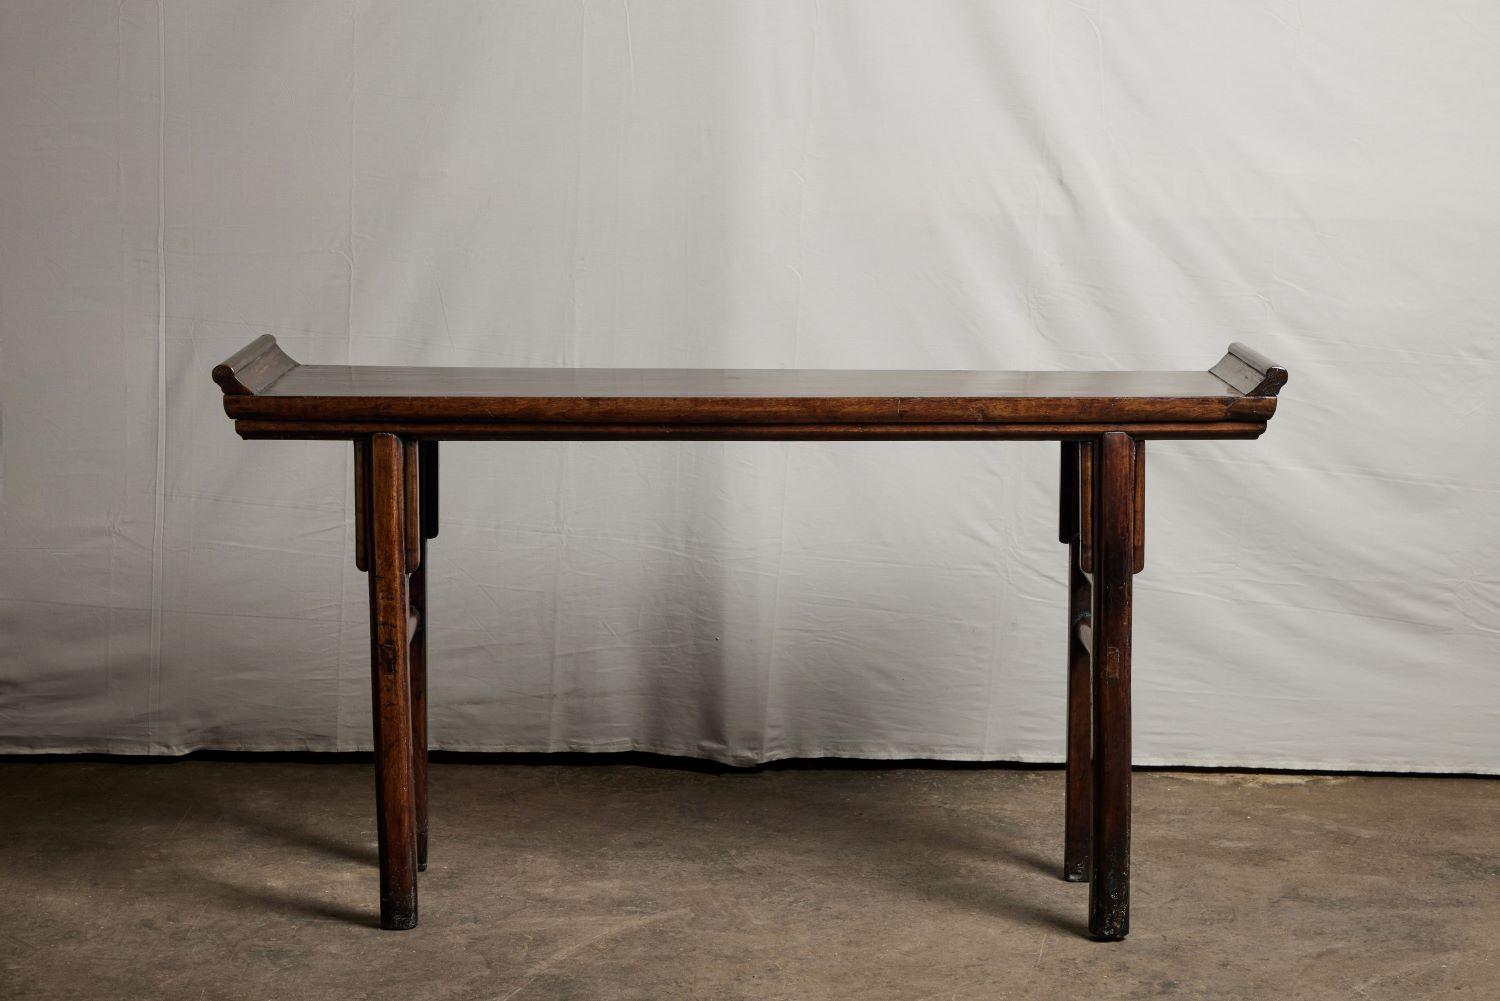 Walnut double-faced Ming style classic altar table from Shanshi. Circa 18th century.